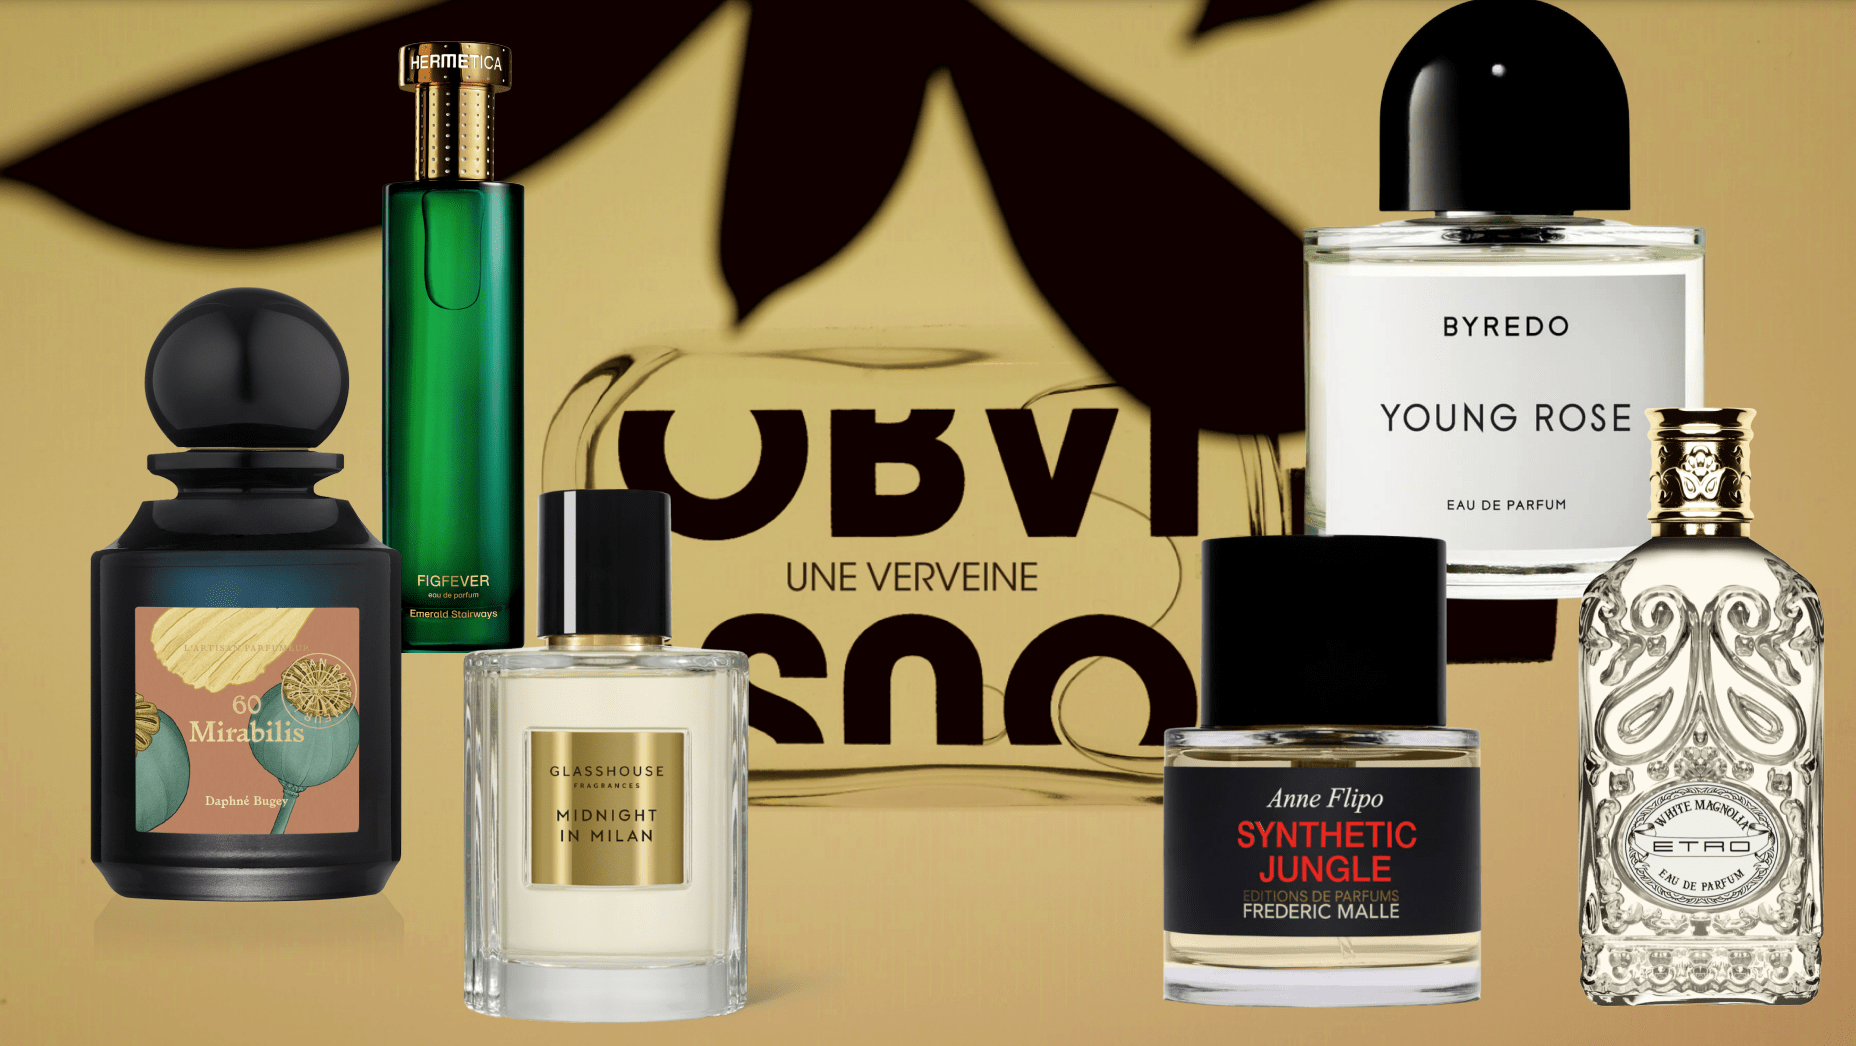 The 8 Best Summer Fragrances and Perfumes for Women | Caviar Feeling ...